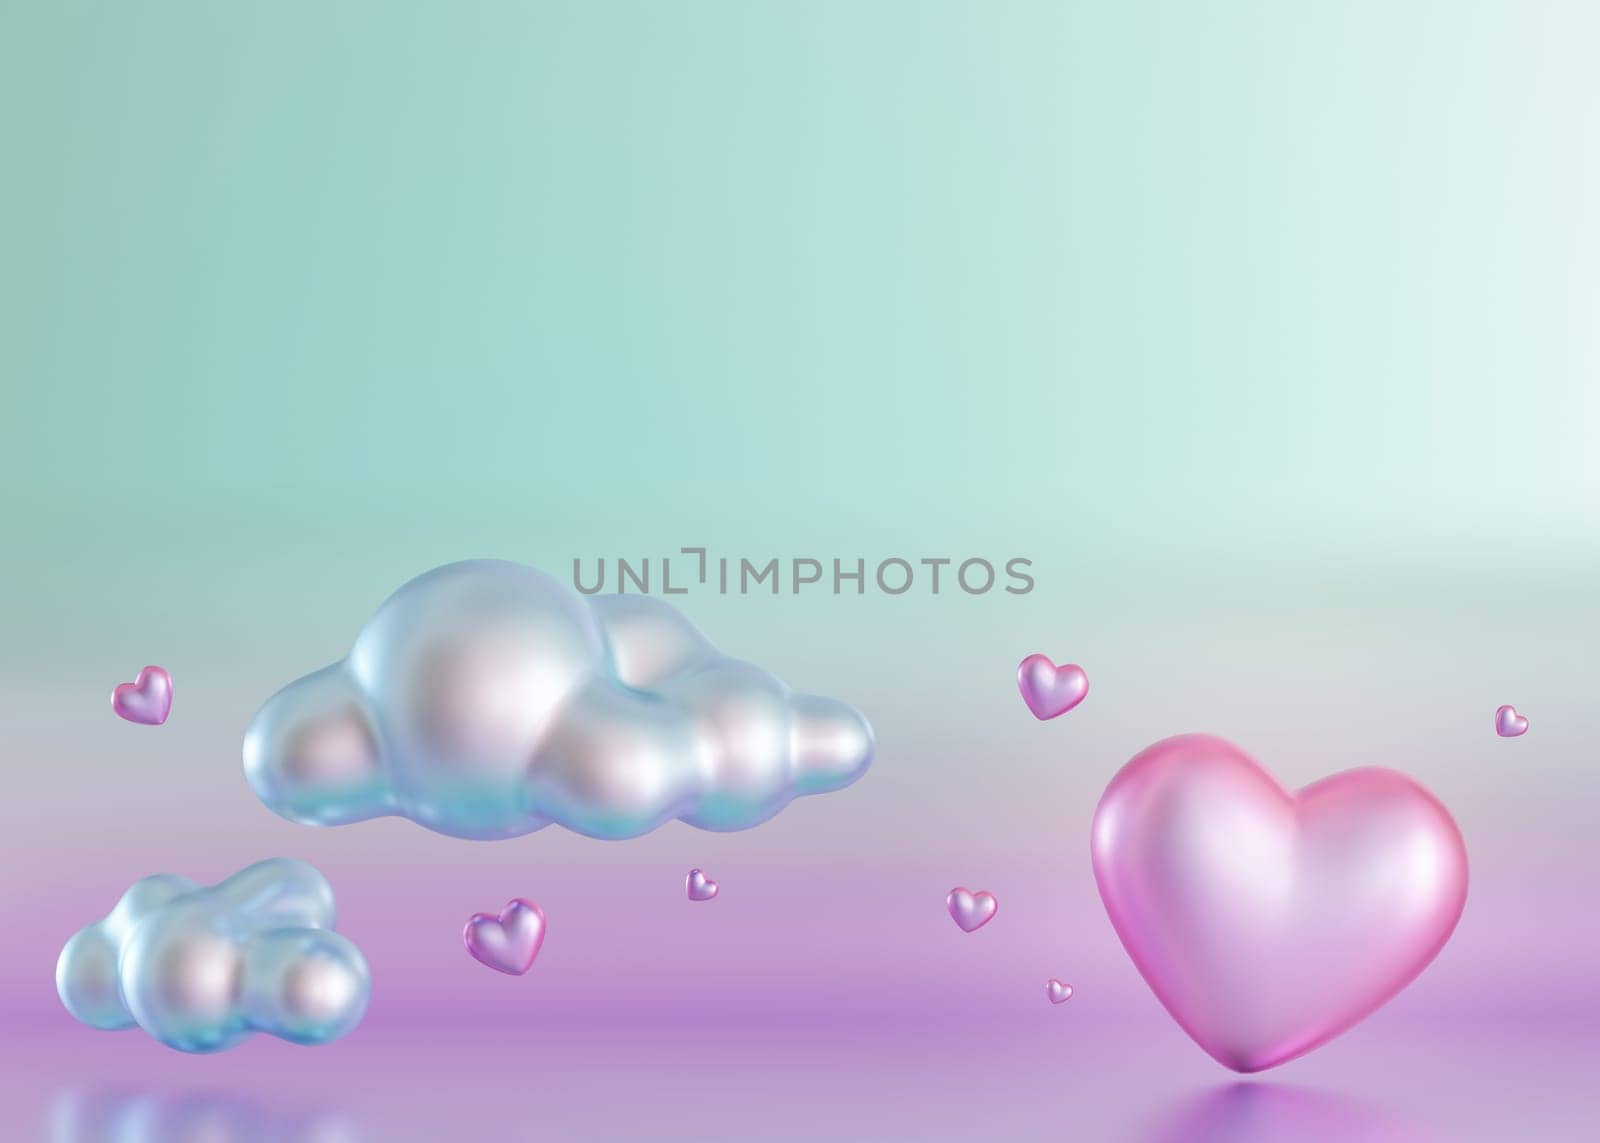 Surreal Y2K-style digital render featuring metallic clouds and floating hearts in a gradient of blue to violet, with ample copy space for text. 3D. by creativebird